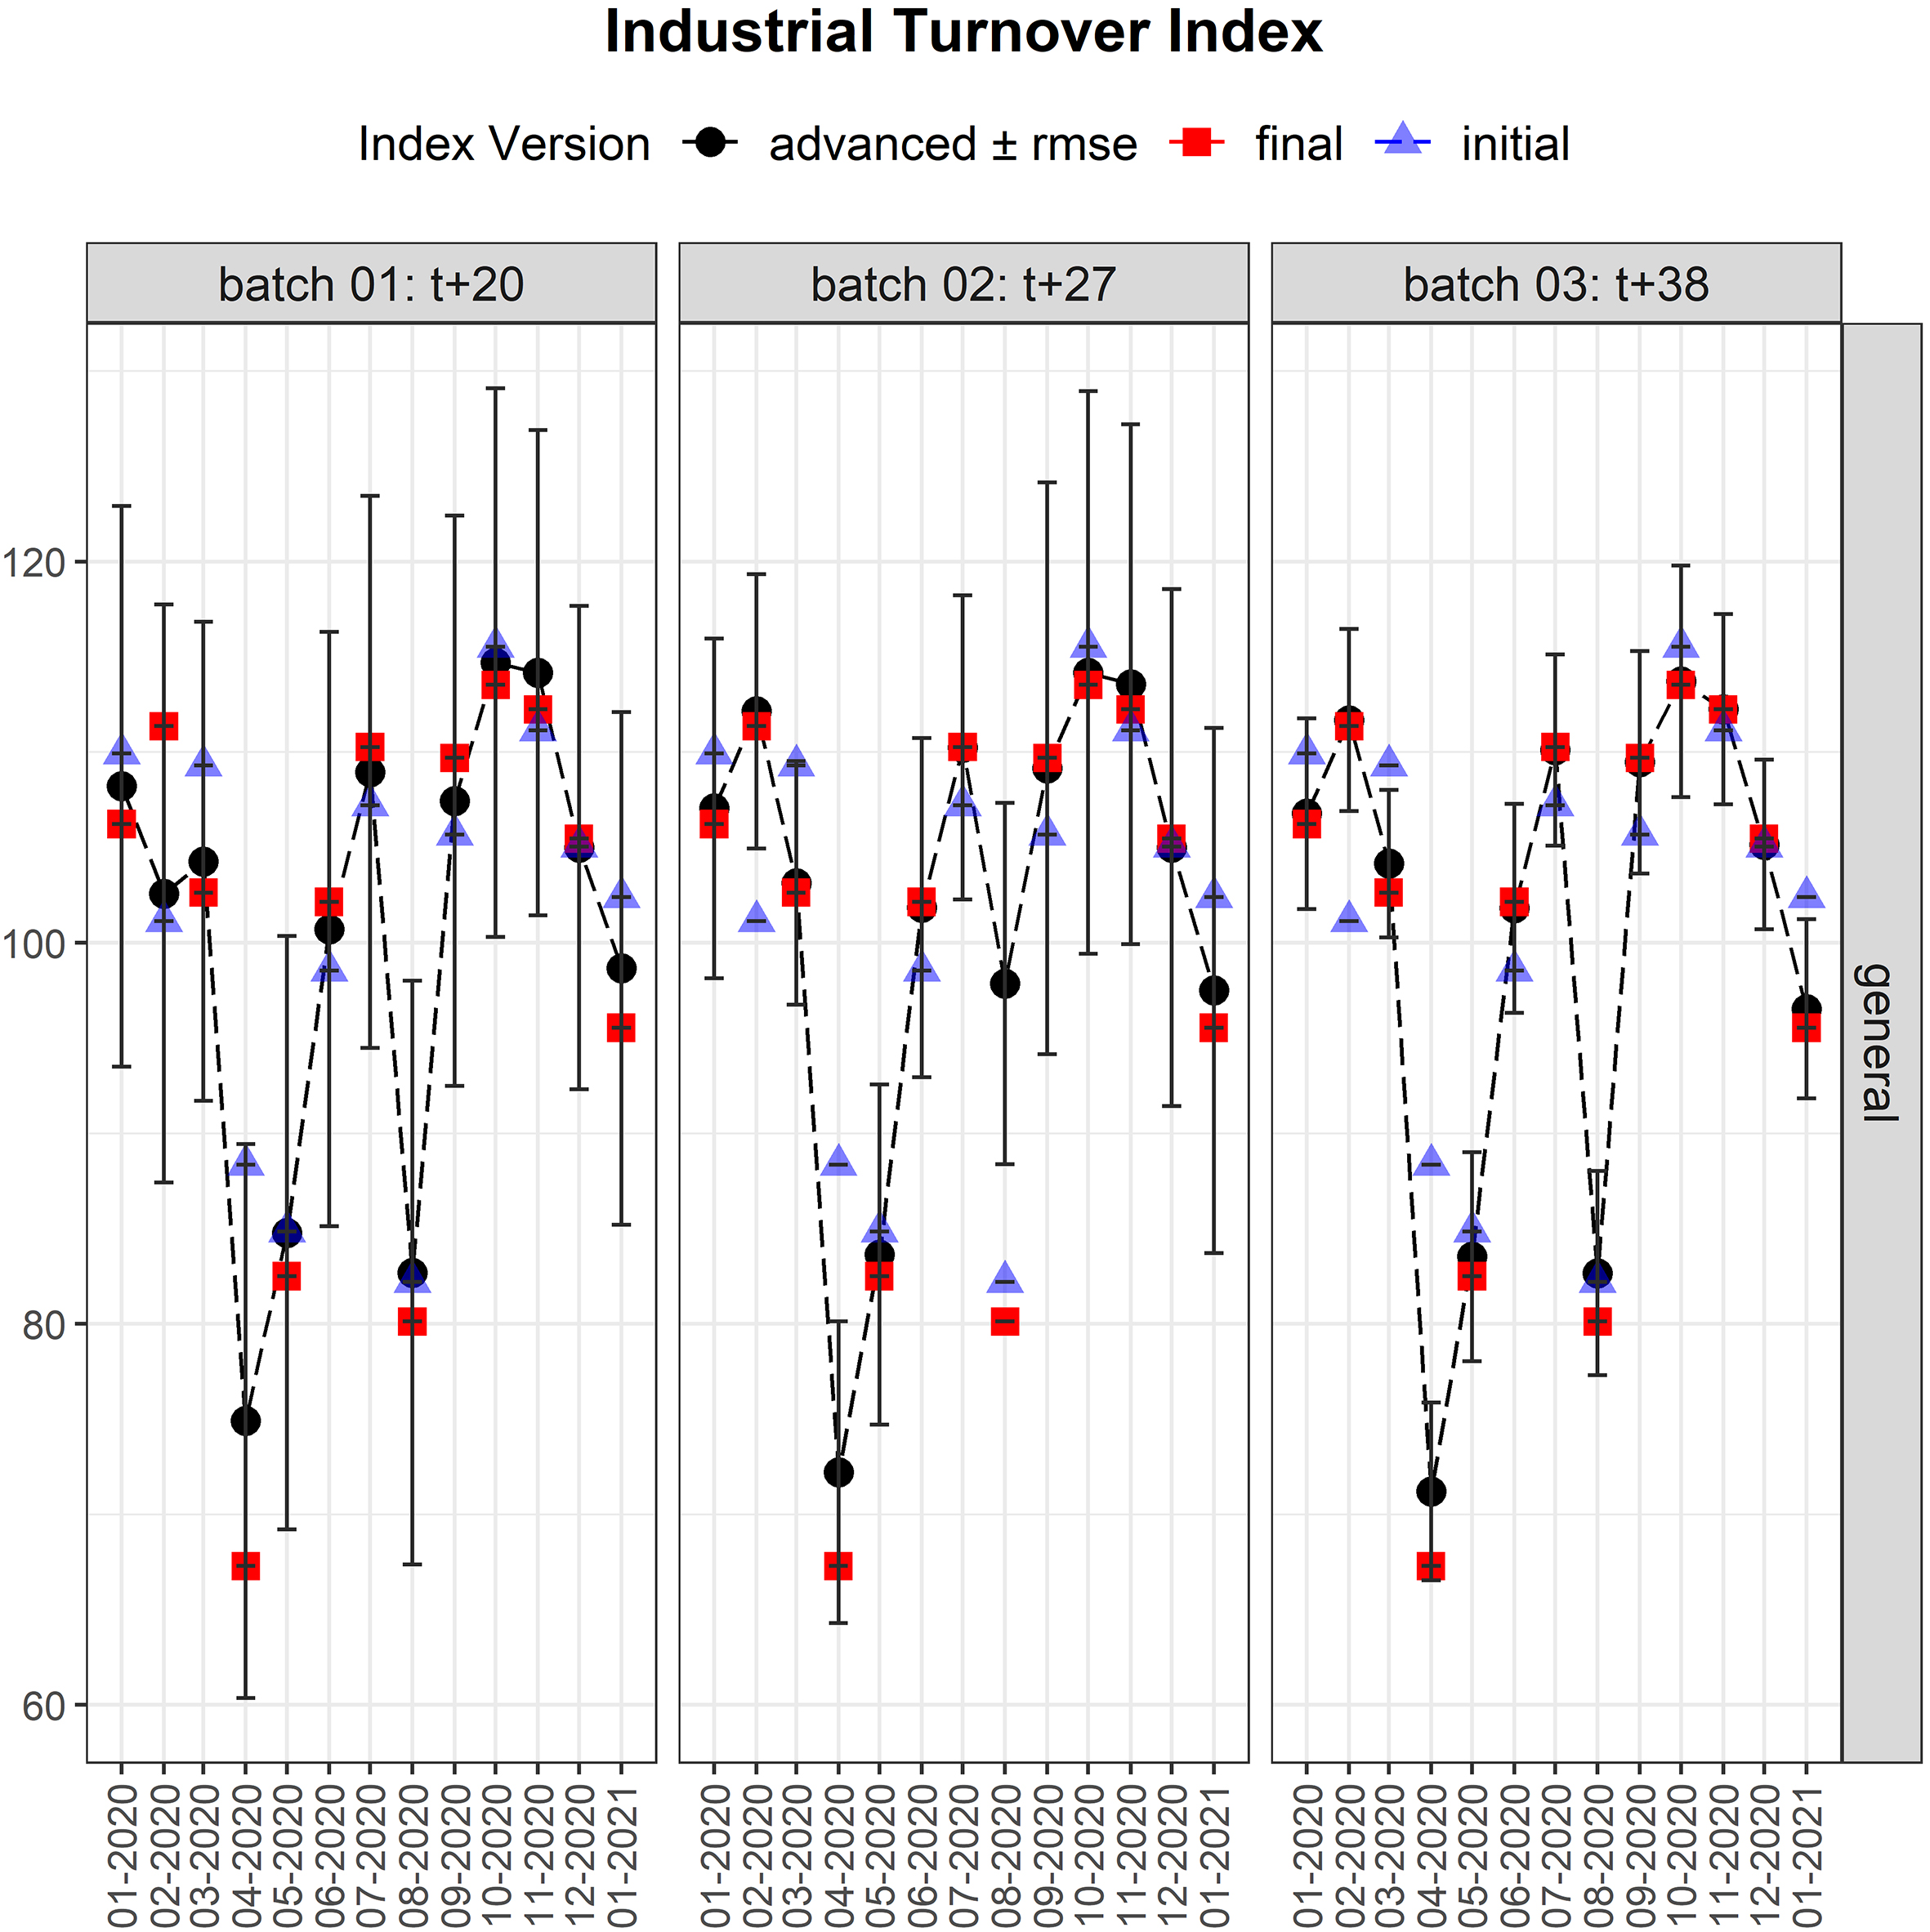 General Advanced Industrial Turnover Index. The left panel corresponds to the first batch, the central panel to the second, and the right panel to the third and last batch. In blue, the Advanced ITI 0, which does not include current information; in black, the advanced ITI for each batch; in red, the final published index. For instance, in April 2020 our prediction for batch 01 (t+ 20) was 74.9 (black), the real value was 67.3 (red) and the prediction, if we had not included information of April, was 88.3 (blue).